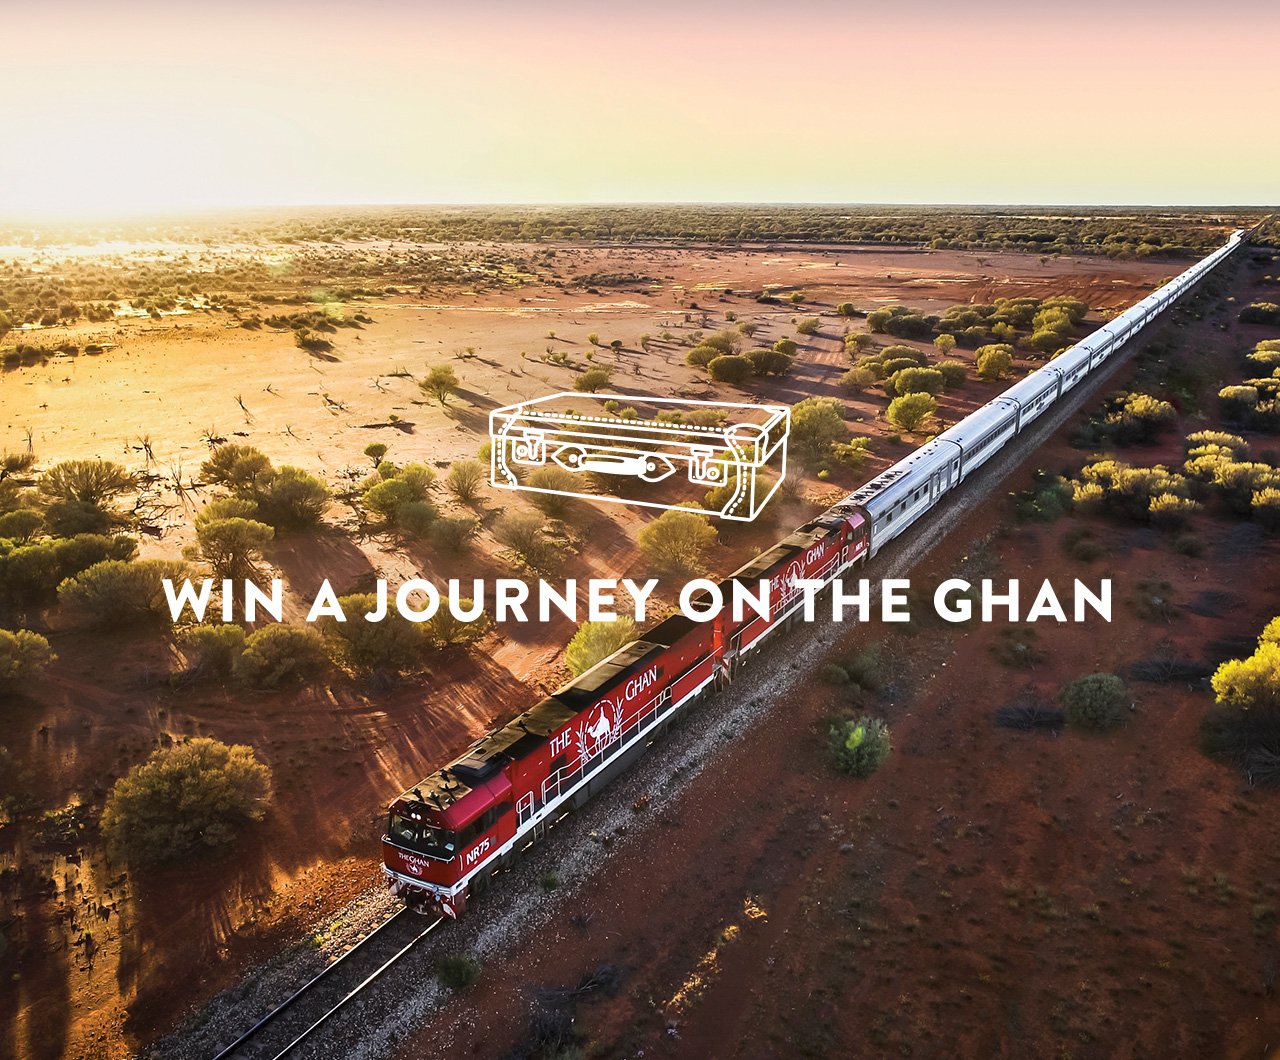 R.M.Williams - Welcome to Journey On The Ghan, a legendary